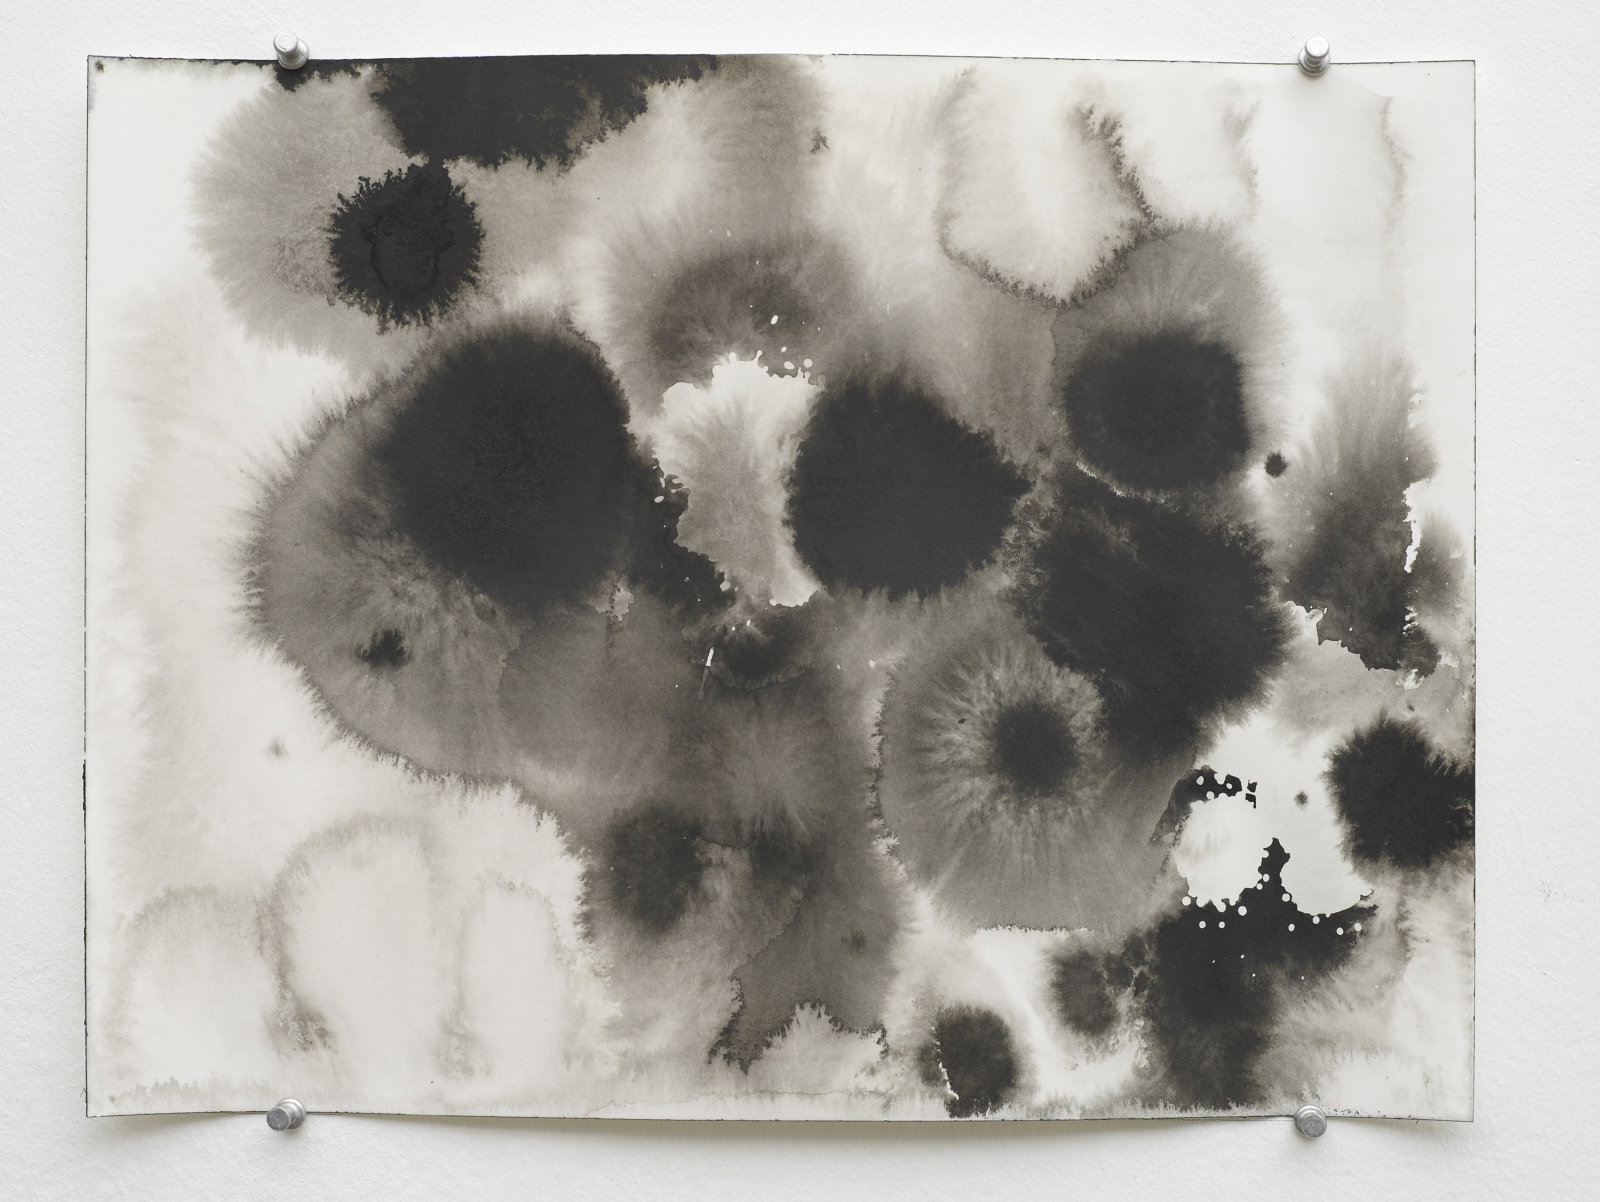 Christina Mackie, Studies for Explosions, 2011, indian ink on paper, dimensions variable